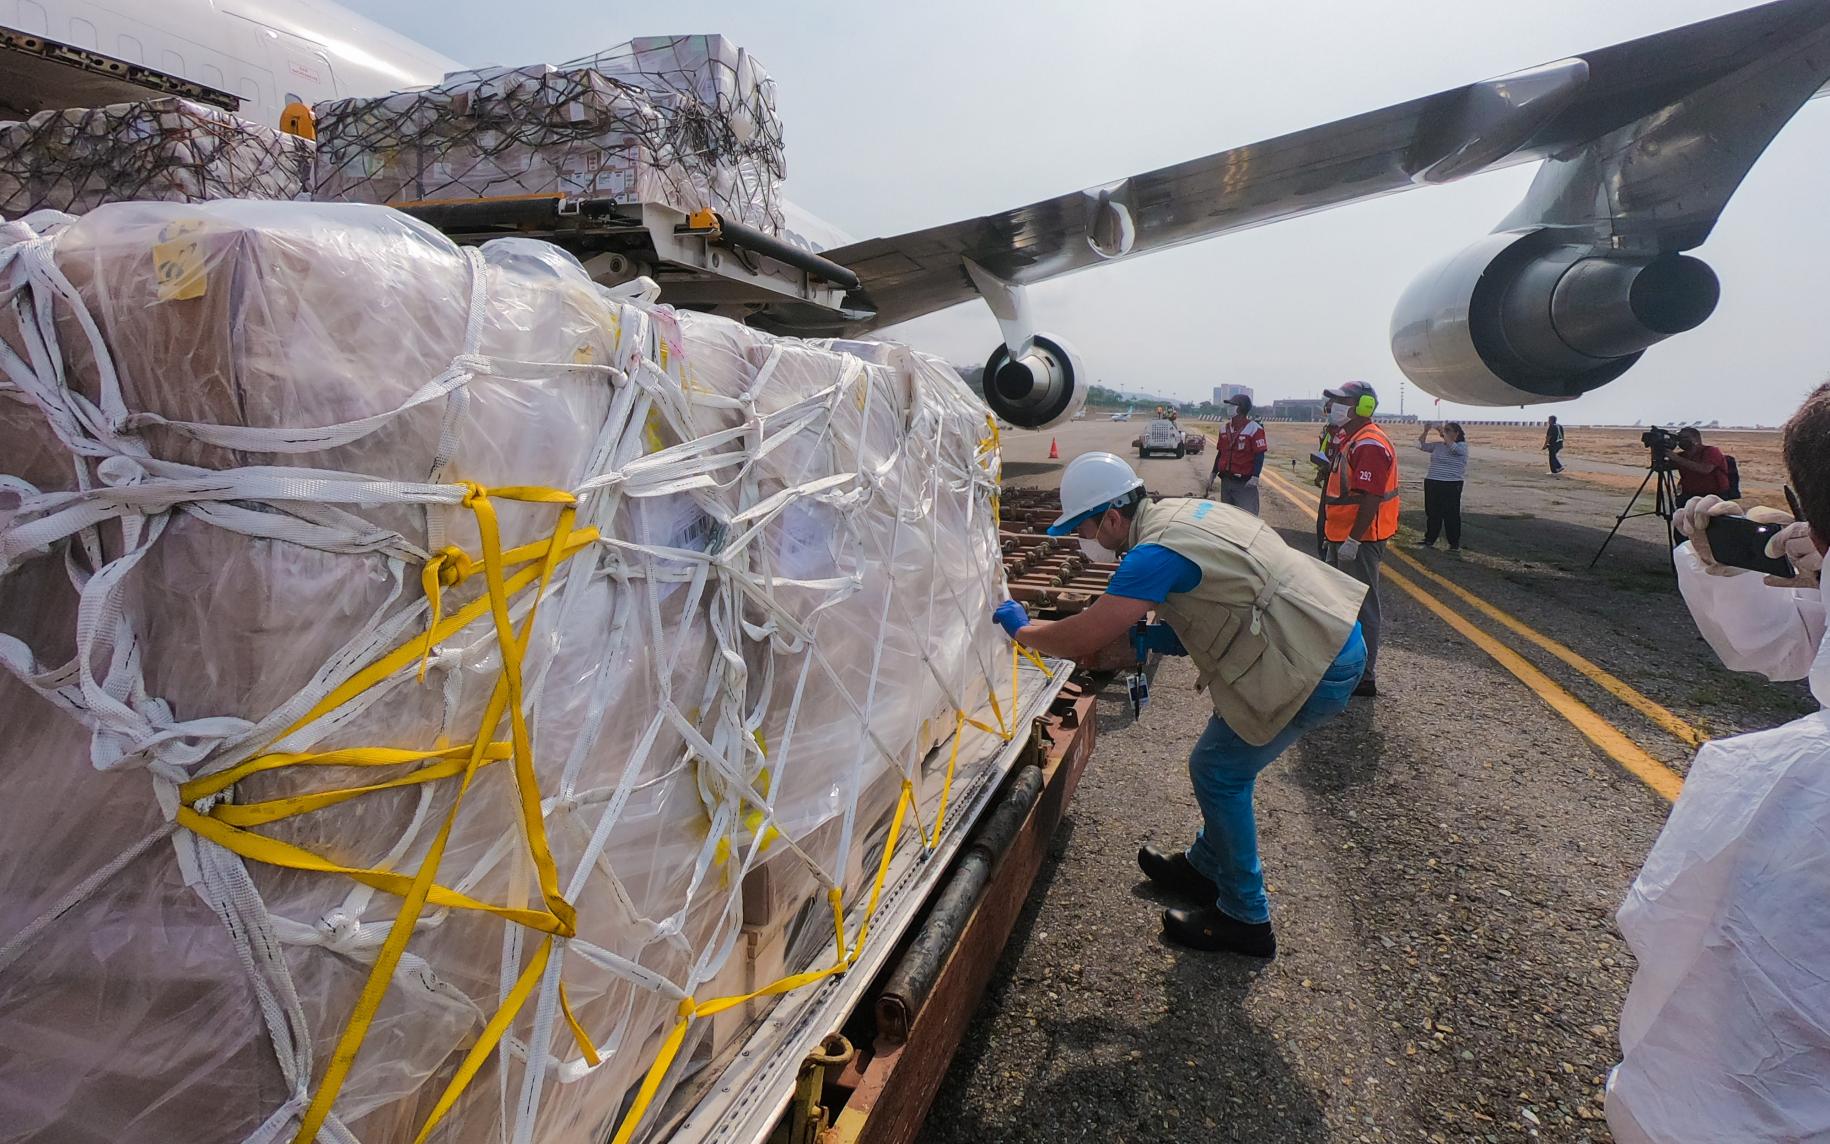 A plane, managed by UNICEF, arrived in the country with 90 tons of supplies for the care of the most vulnerable children, adolescents, and women, in the context of the # COVID-19 pandemic.